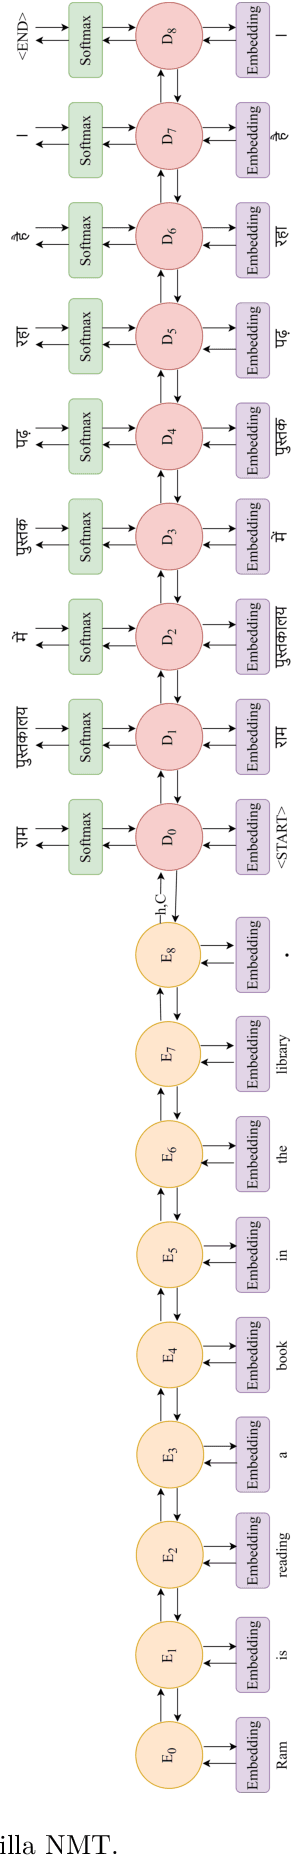 Figure 2 for Machine Translation by Projecting Text into the Same Phonetic-Orthographic Space Using a Common Encoding